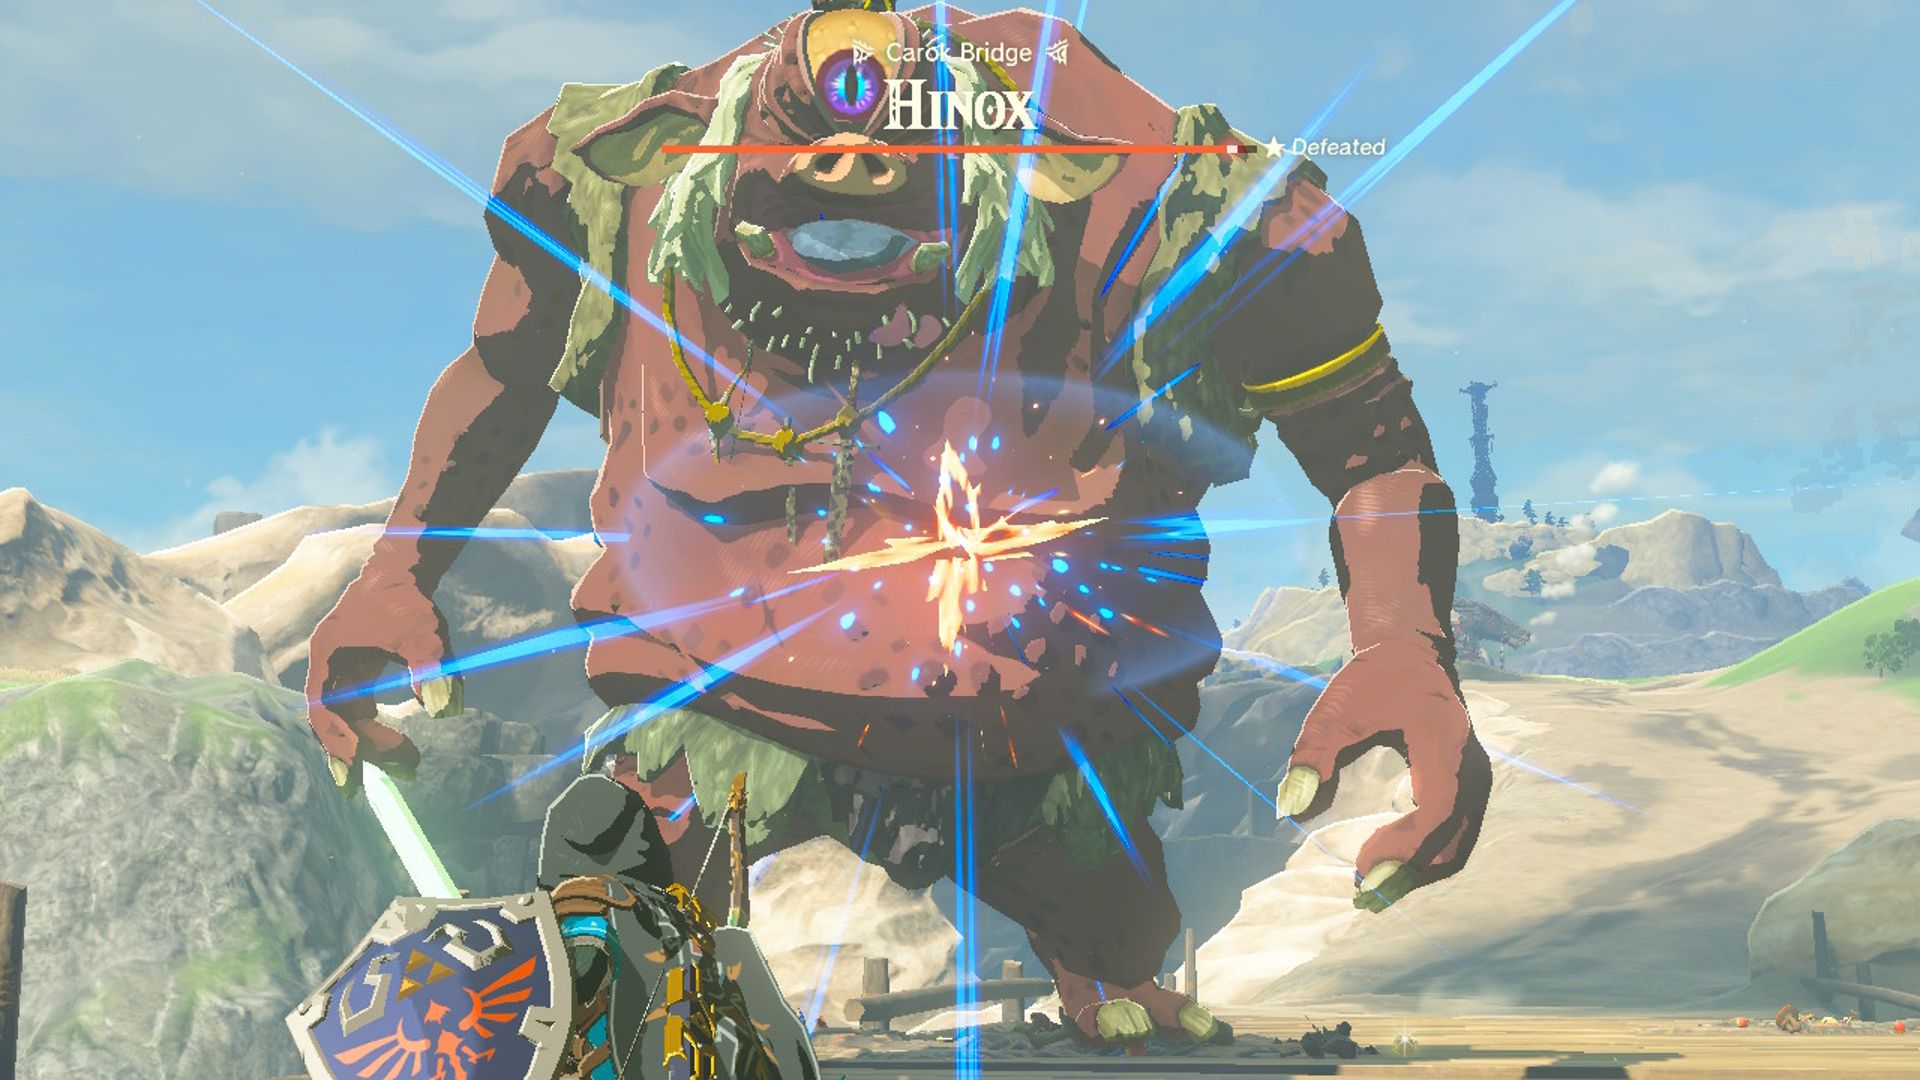 The Legend Of Zelda Tears Of The Kingdom Link Attacking Carok Bridge Hinox With Ranged Master Sword Attack From Champion's Leathers